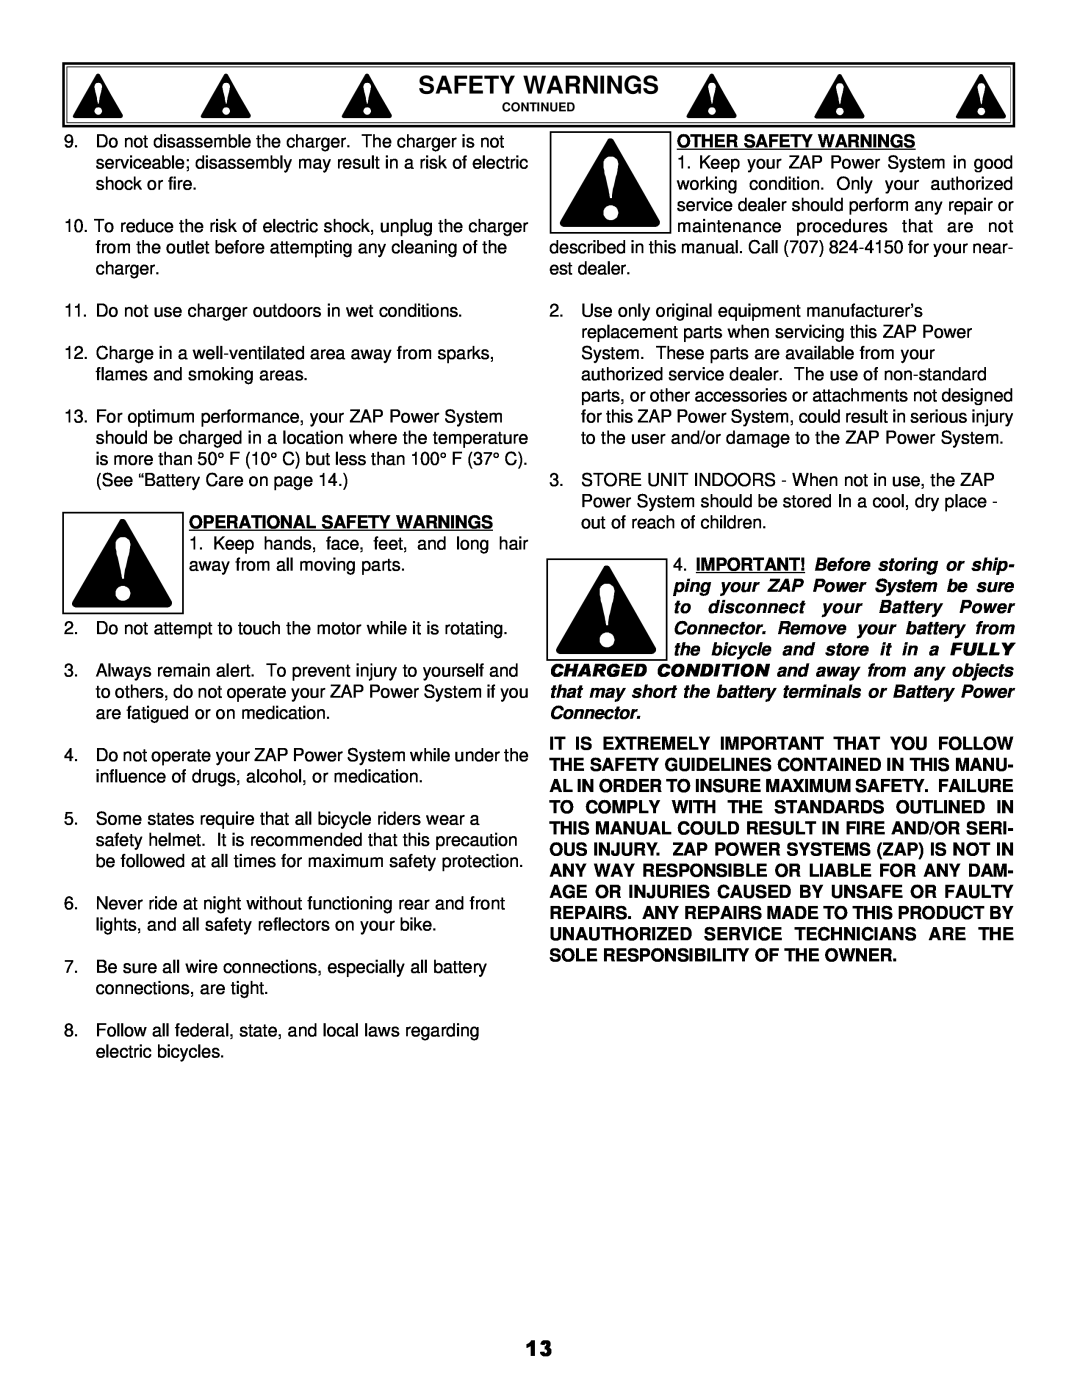 Zap DX owner manual Operational Safety Warnings, Other Safety Warnings 